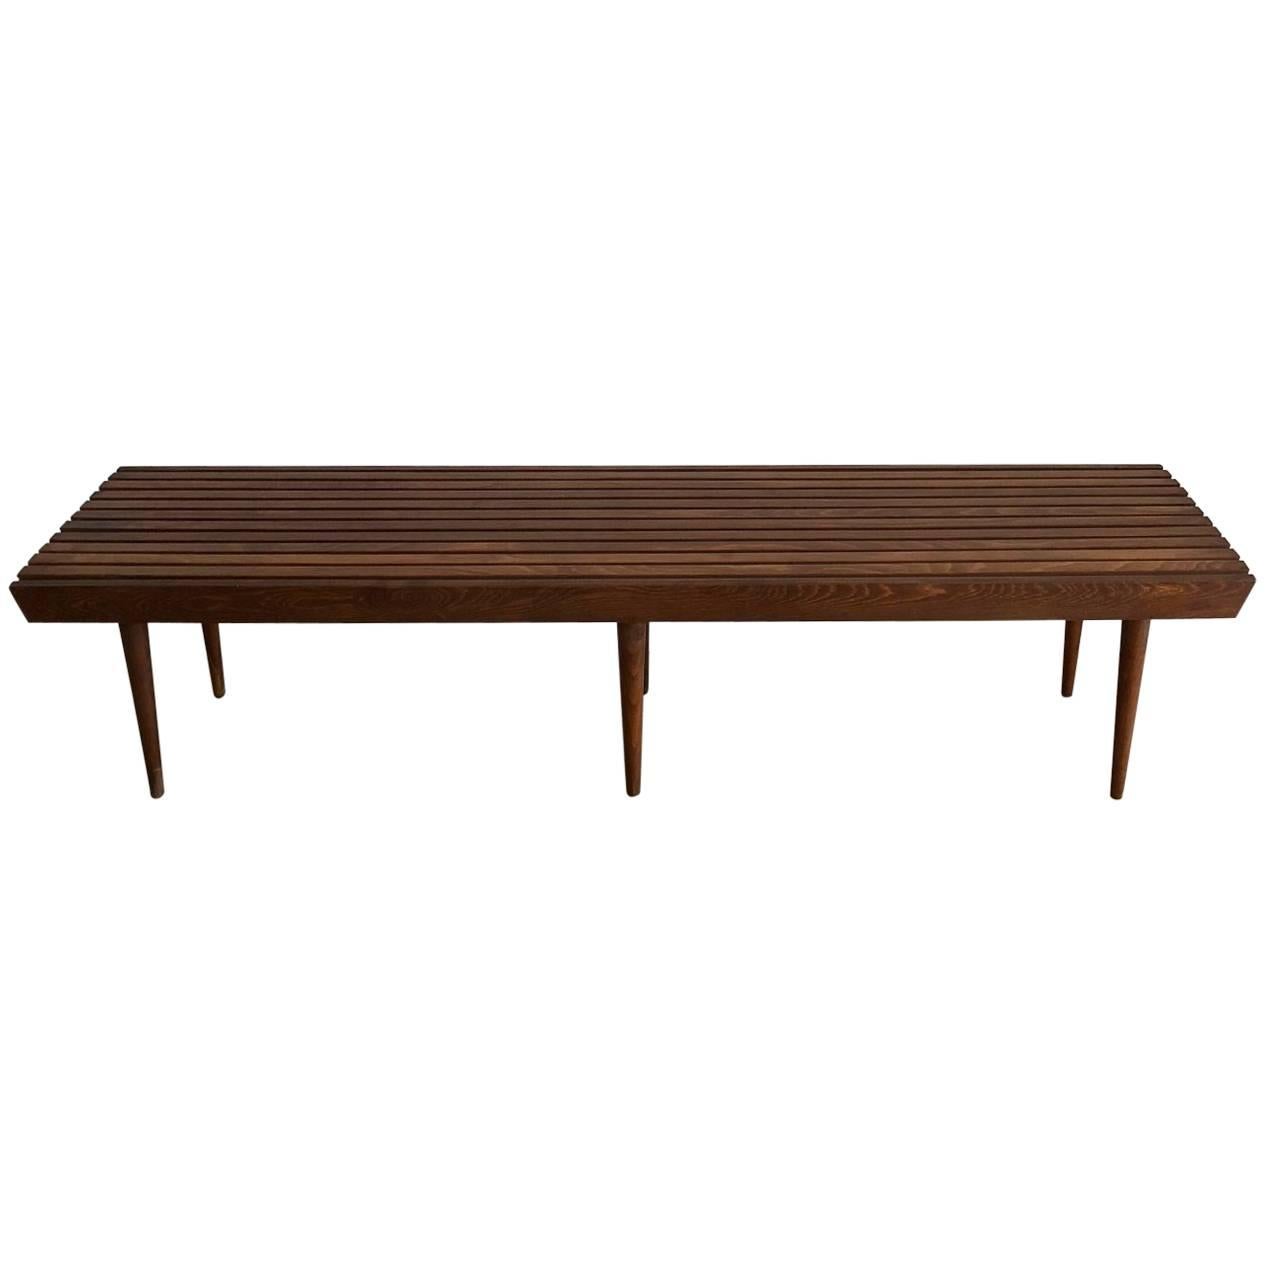 Midcentury Walnut Slat Bench or Coffee Table with Peg Legs